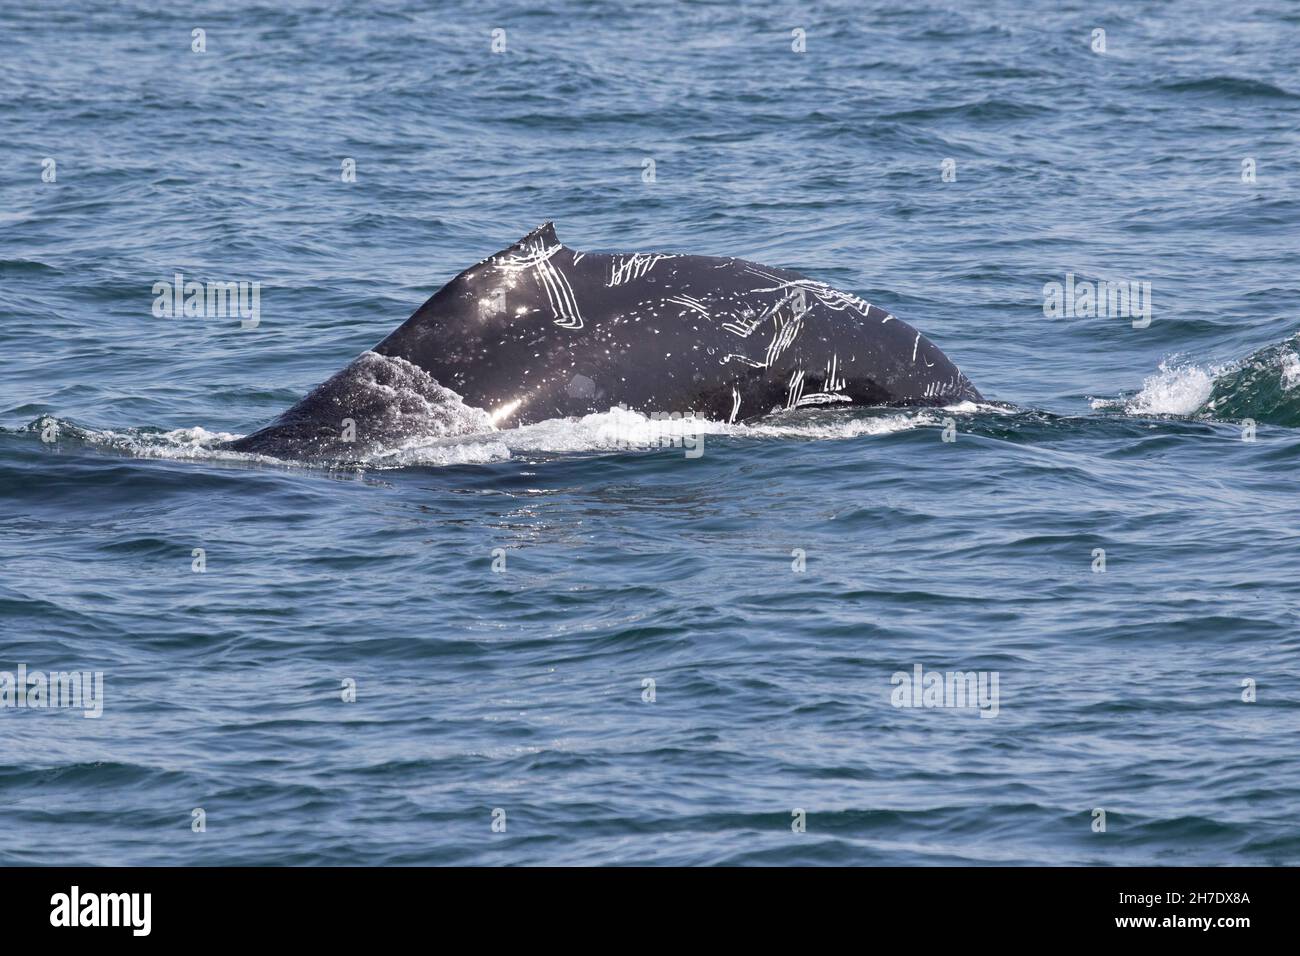 A diving Humpback Whale shows the results of a Killer Whale attack on its skin as it dives into California's Pacific Ocean. Stock Photo